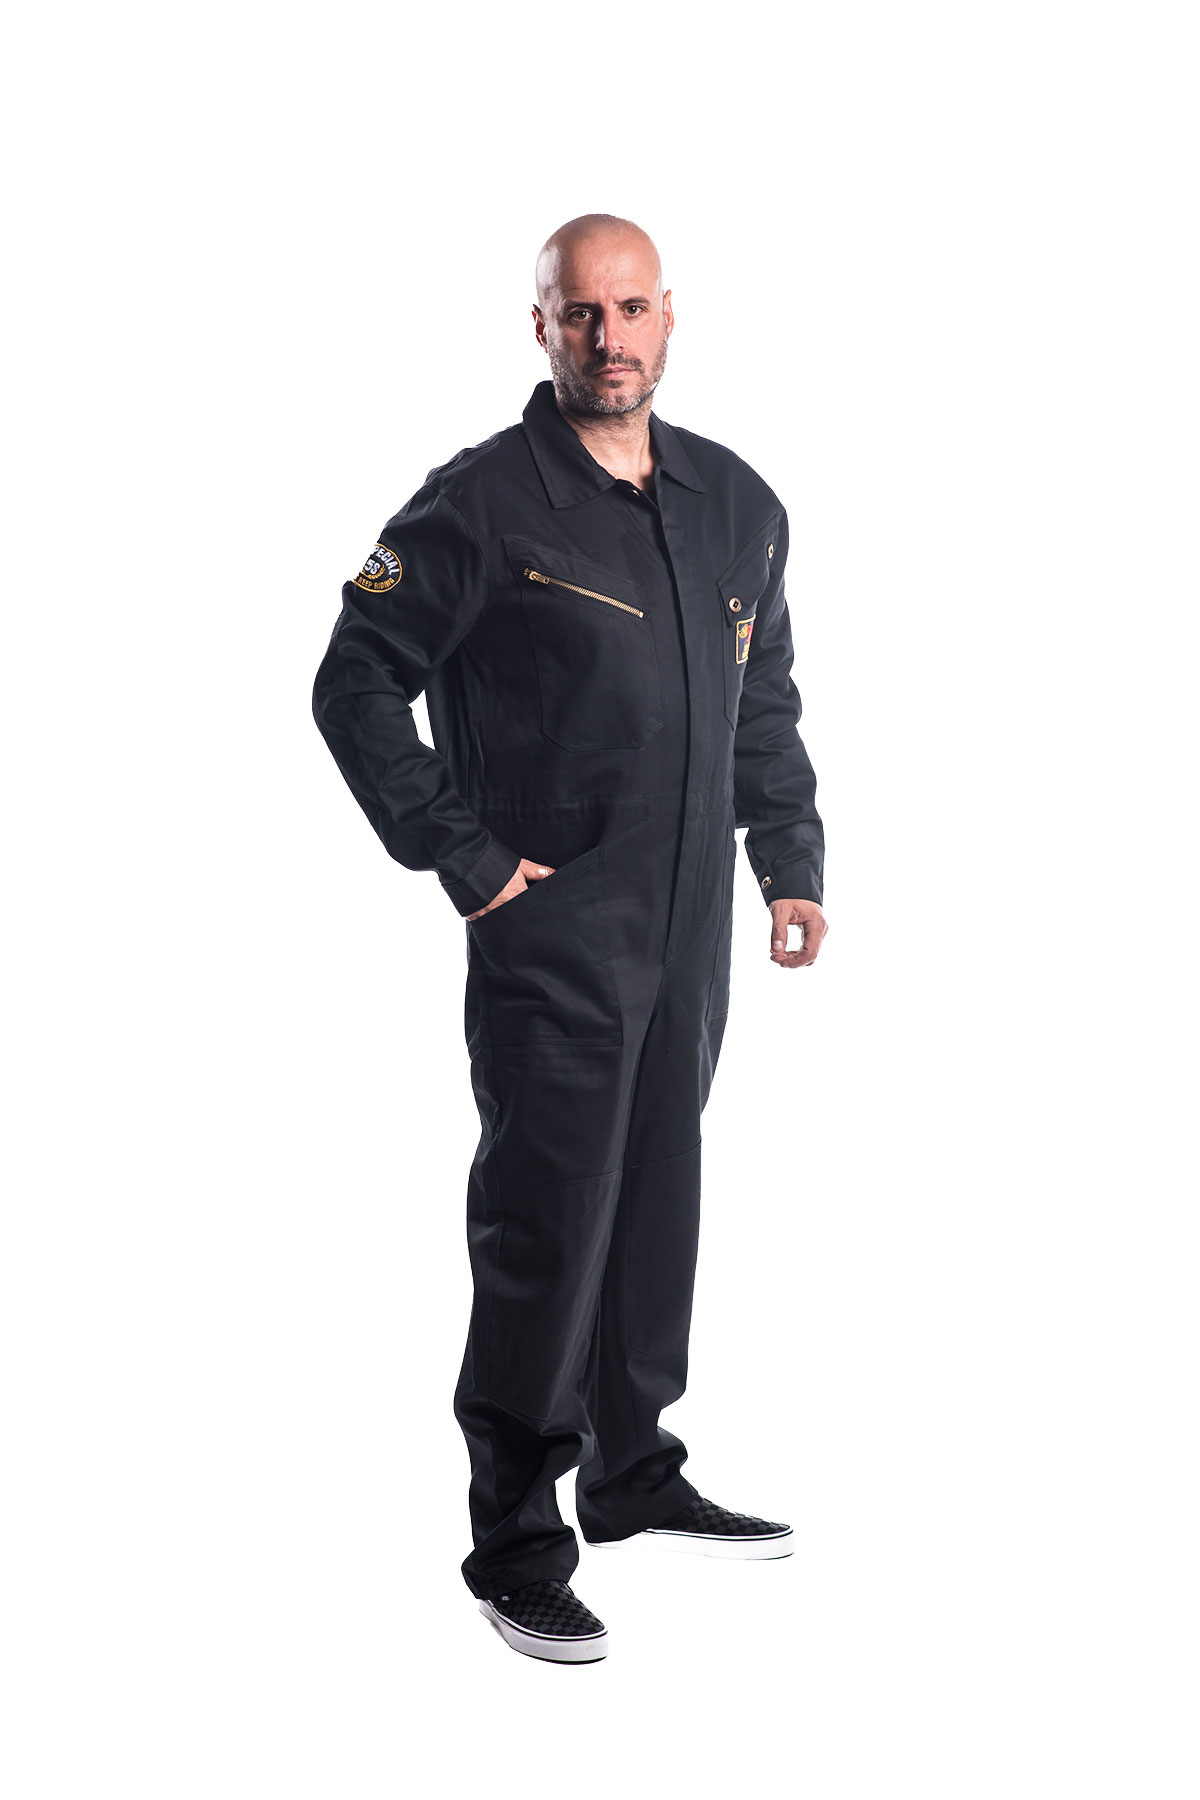 Black workwear Coverall